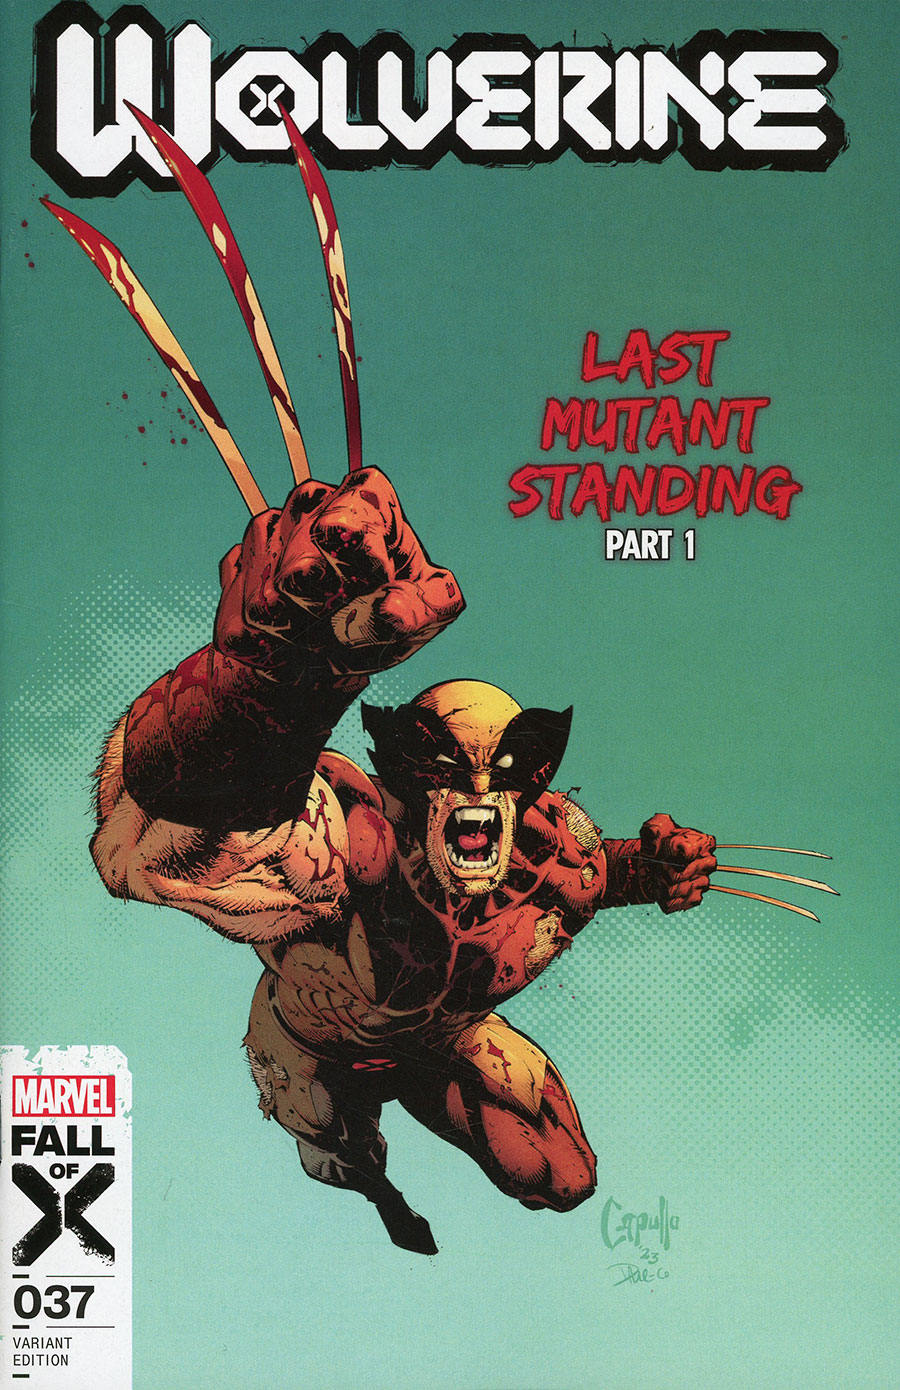 Wolverine Vol 7 #37 Cover C Variant Greg Capullo Cover (Fall Of X Tie-In) (Limit 1 Per Customer)